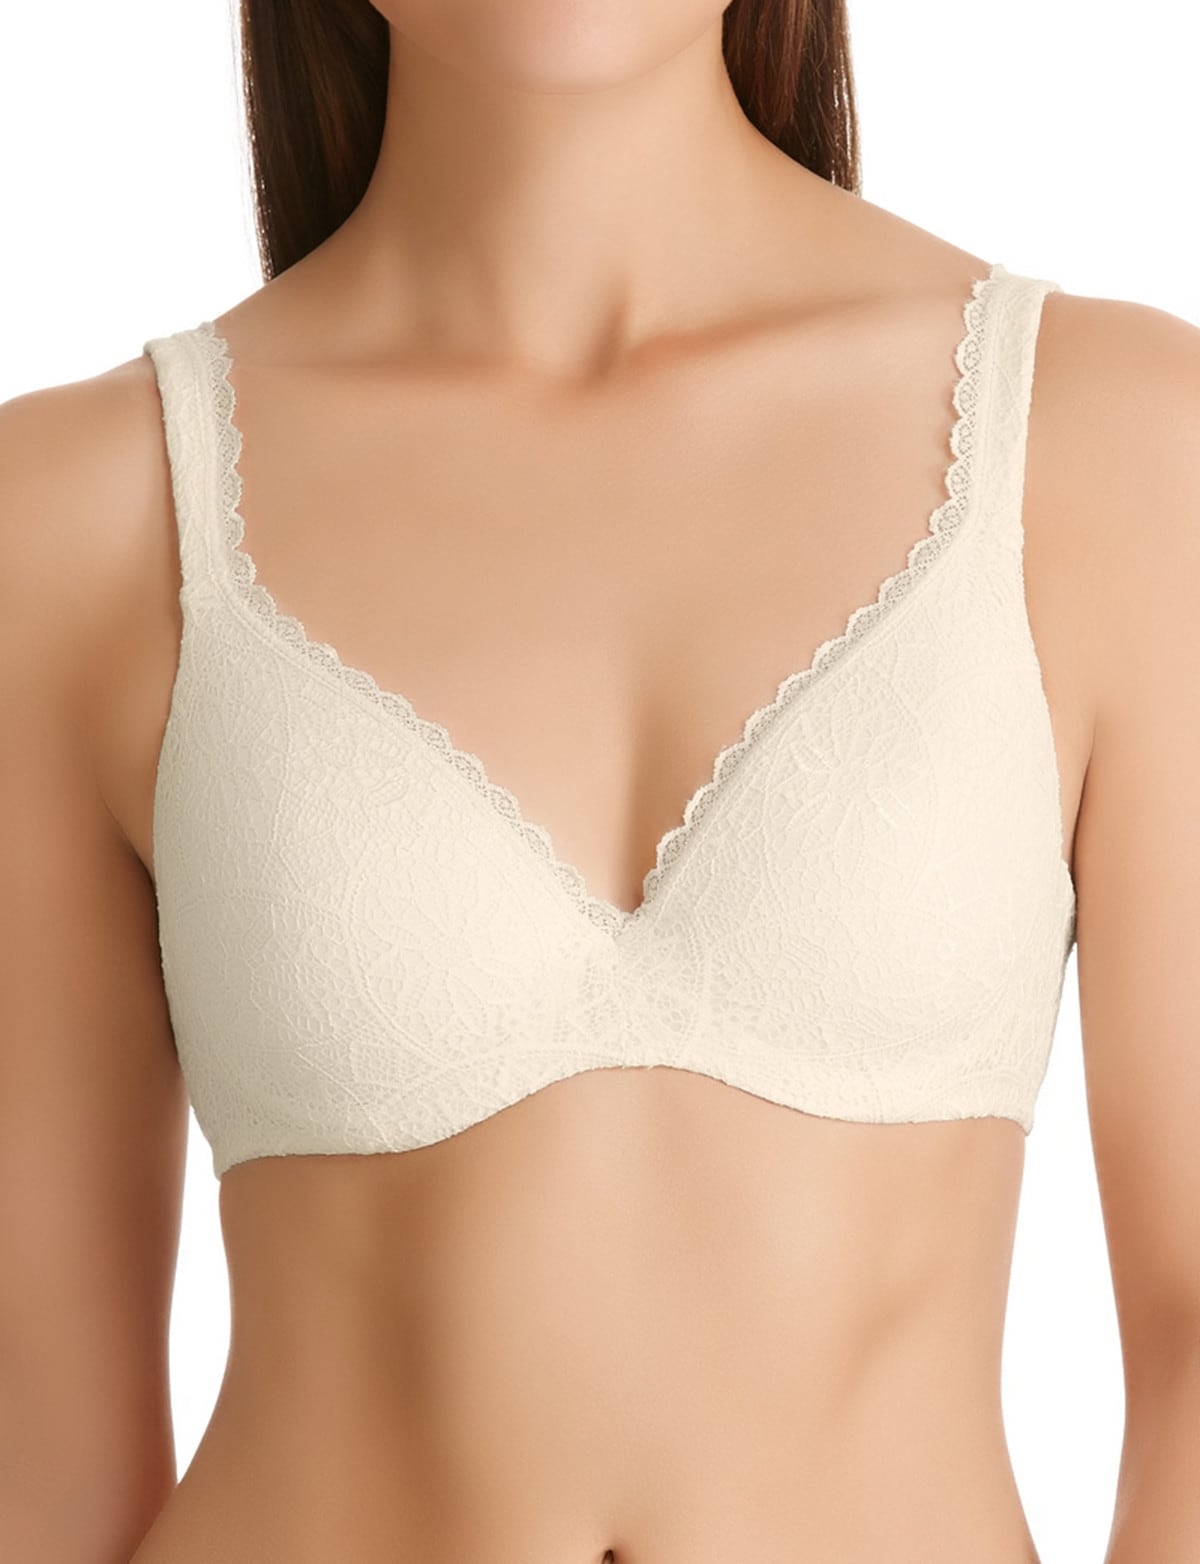 Barely There Lace Contour Bra - Cooks Lingerie & Manchester